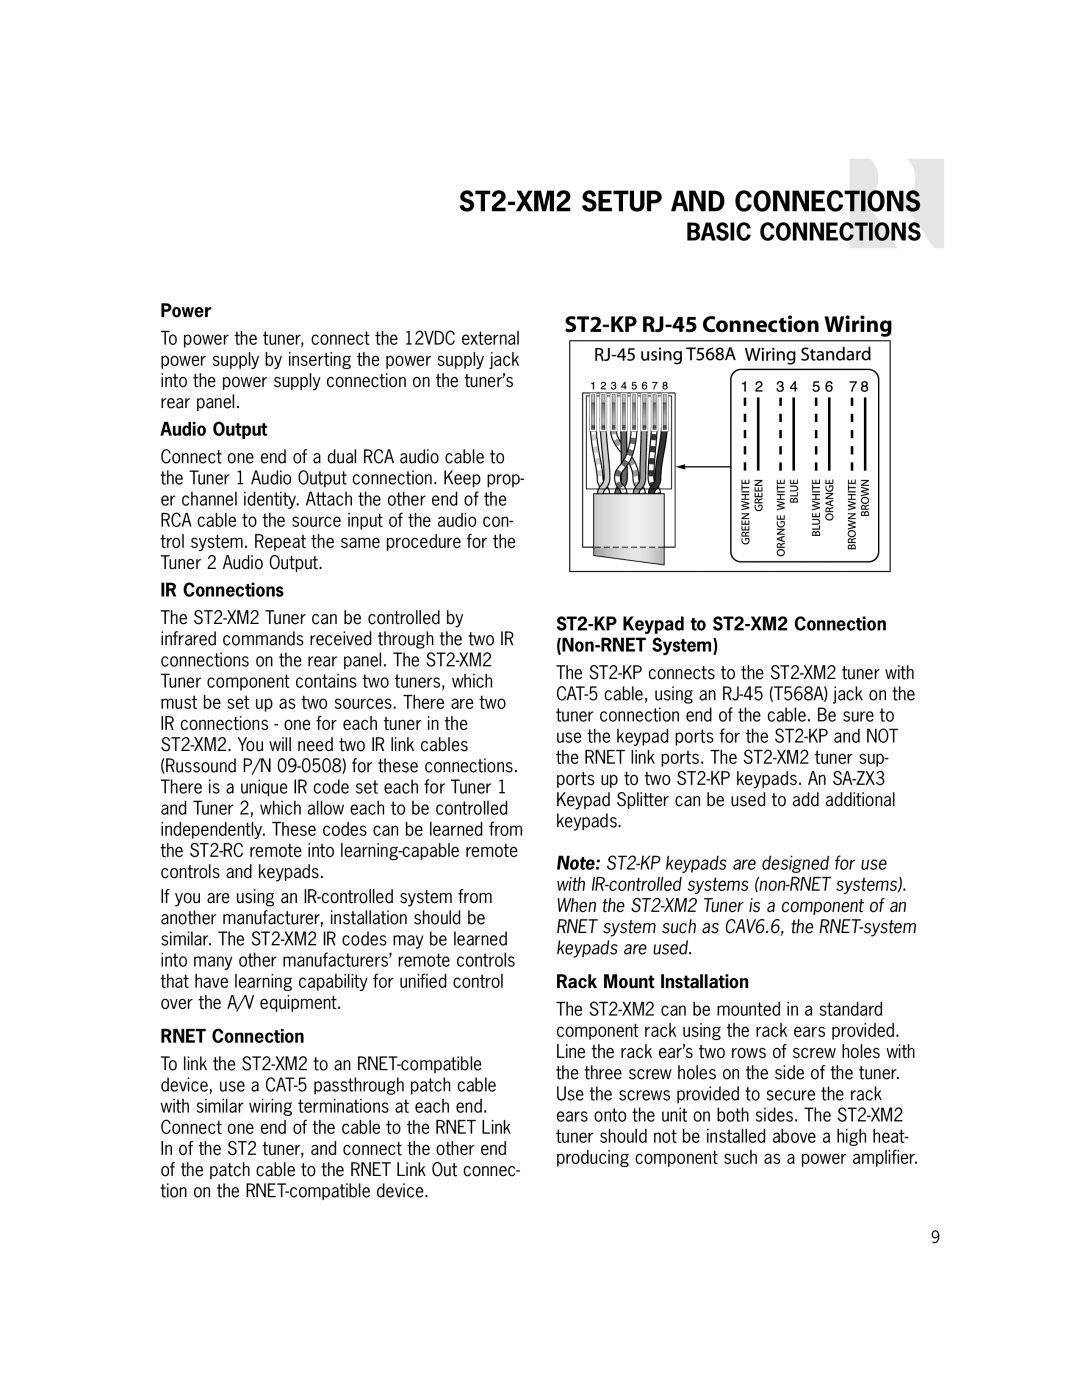 Russound manual ST2-XM2SETUP AND CONNECTIONS, Basic Connections, ST2-KP RJ-45Connection Wiring, Power, Audio Output 